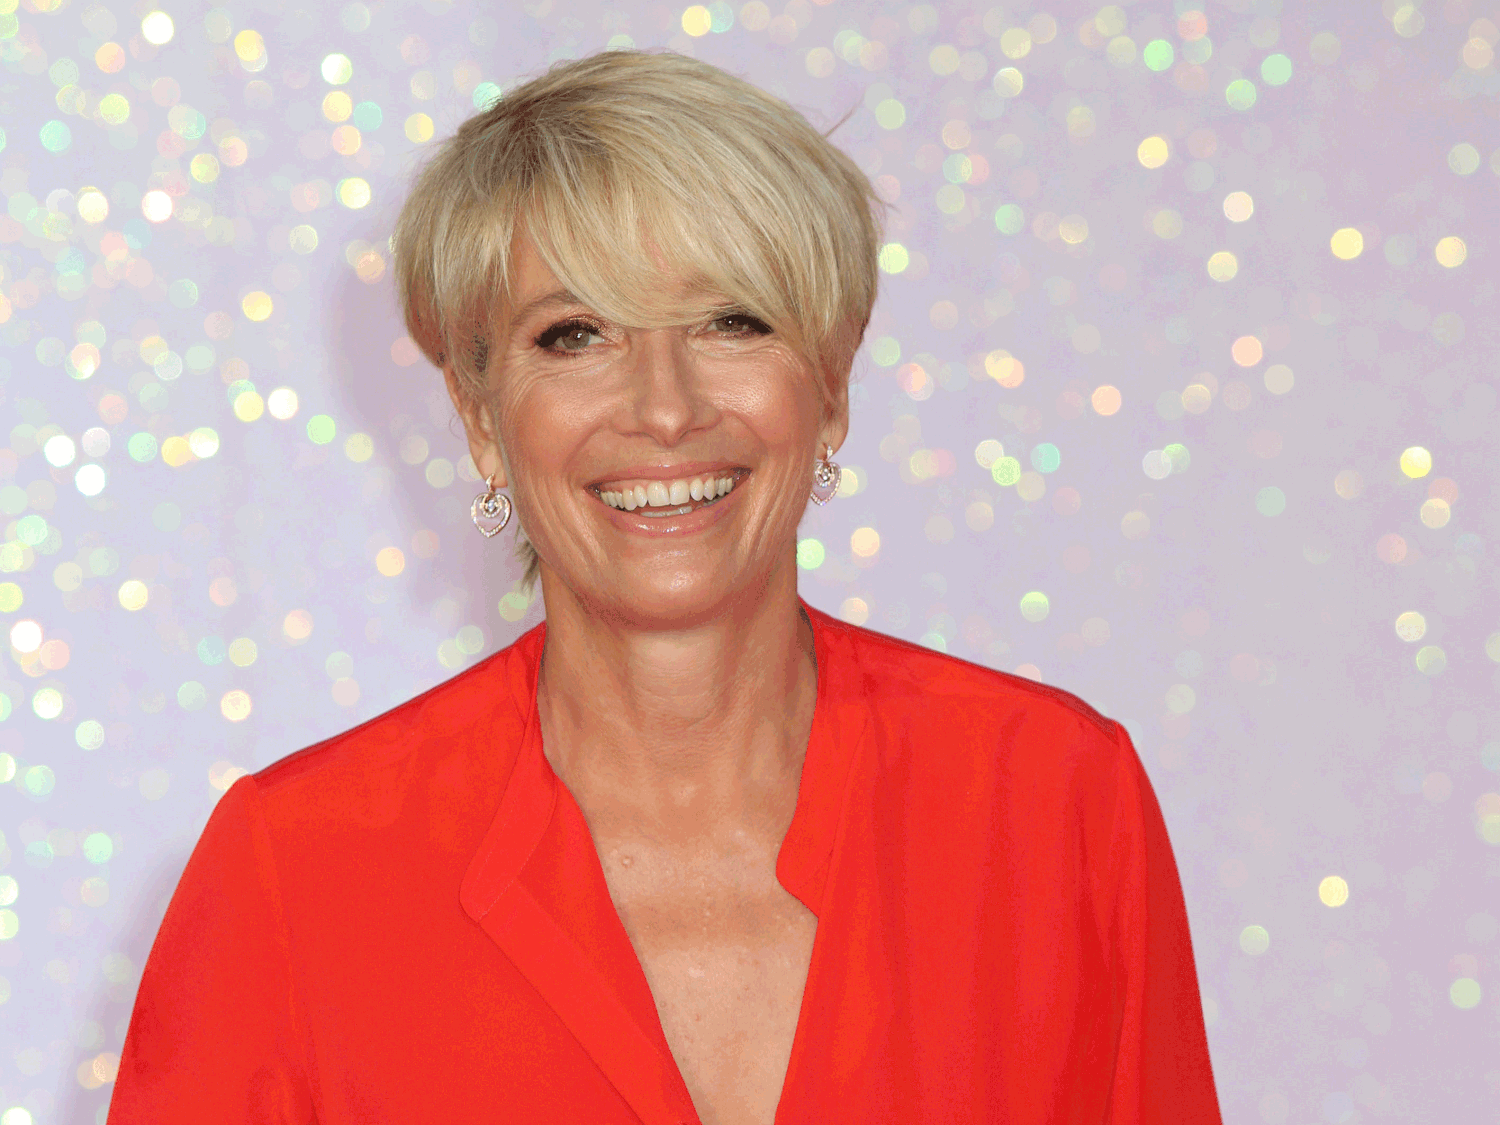 short hairstyles for women over 50 — yours